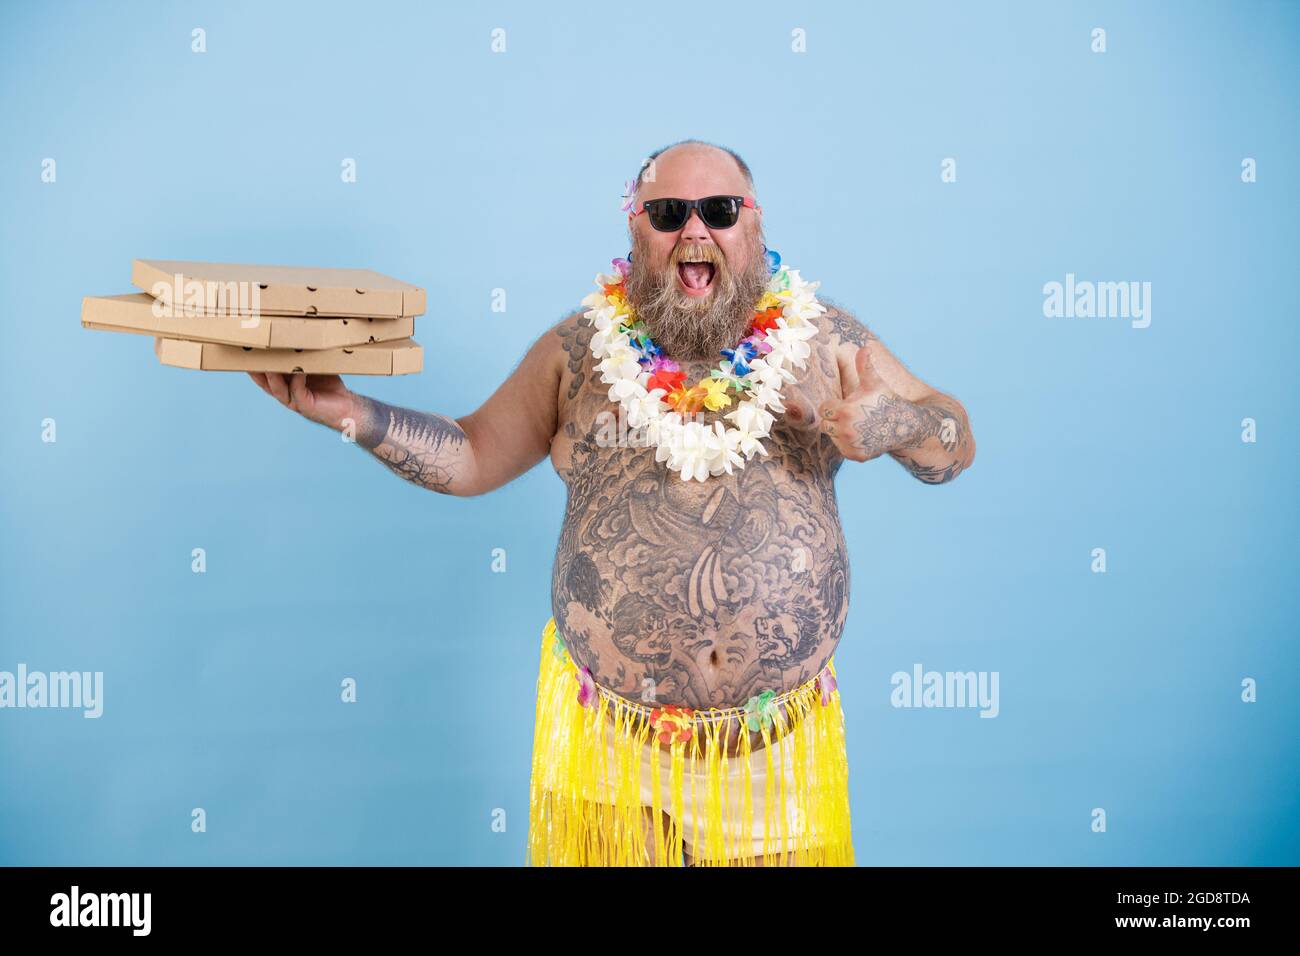 Joyful obese man with flowers garland holds boxes of pizza on light blue background Stock Photo